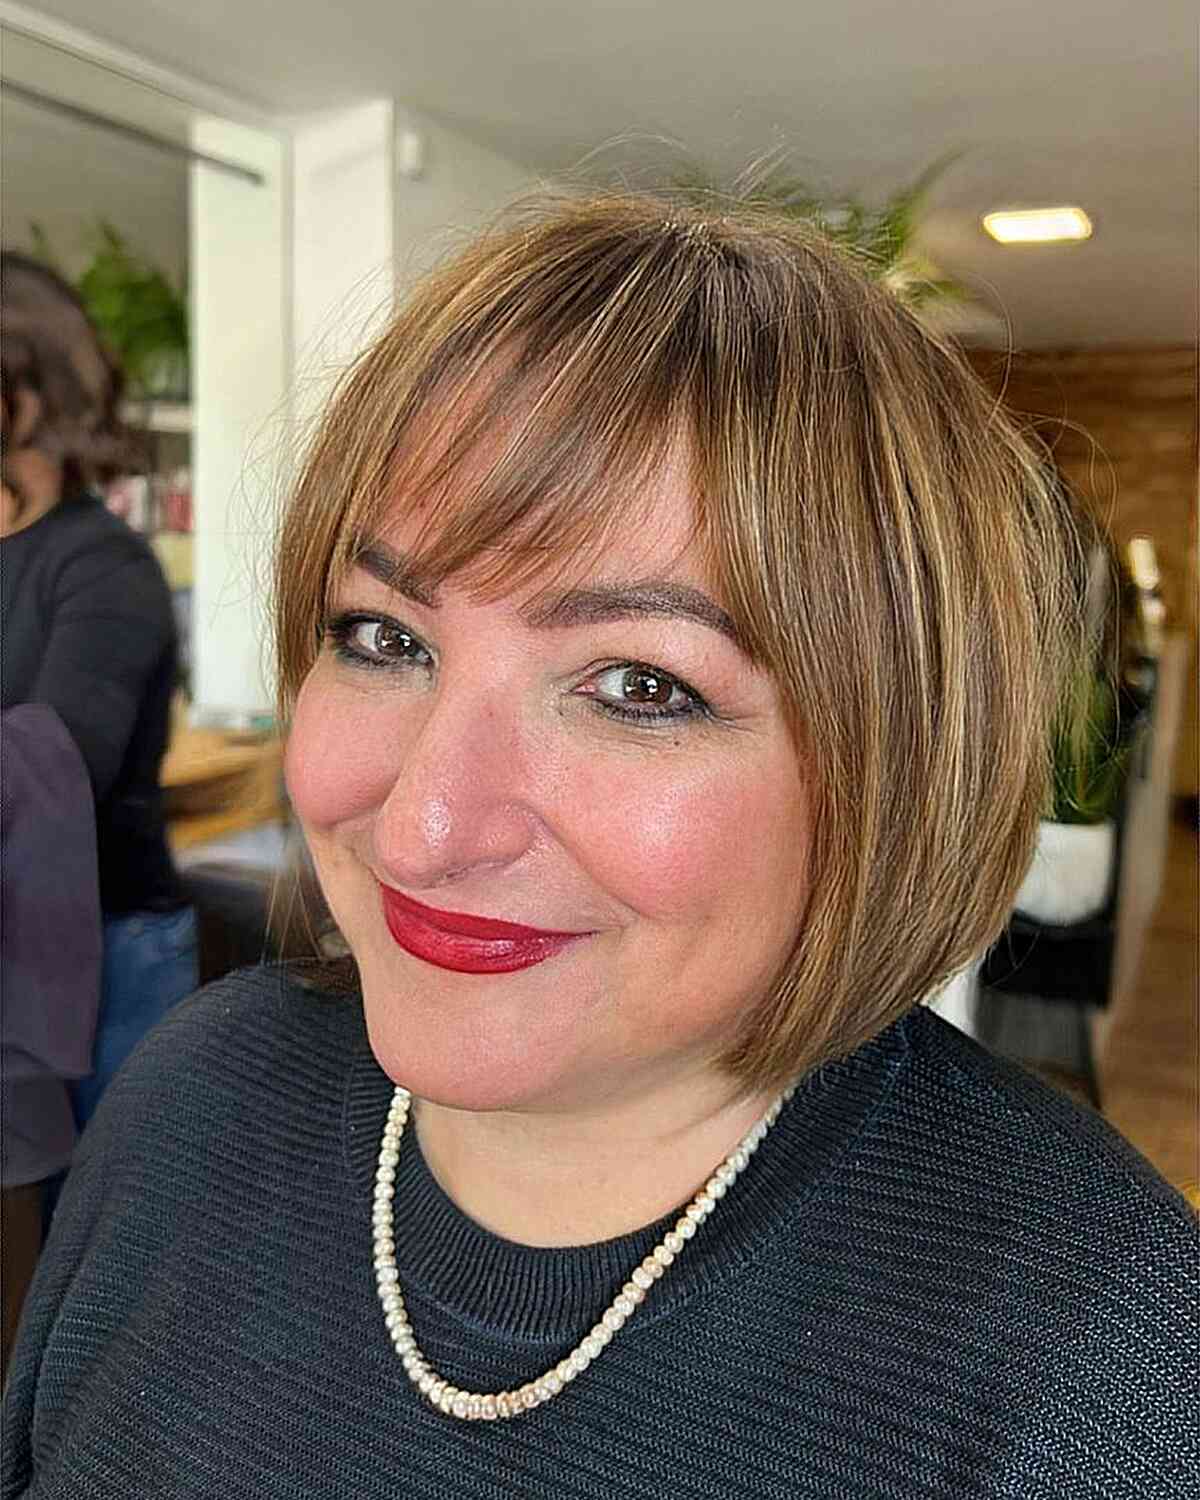 Jaw-Length Cropped Bob with Side-Swept Bangs on 40-Year-Old Ladies with Round Faces